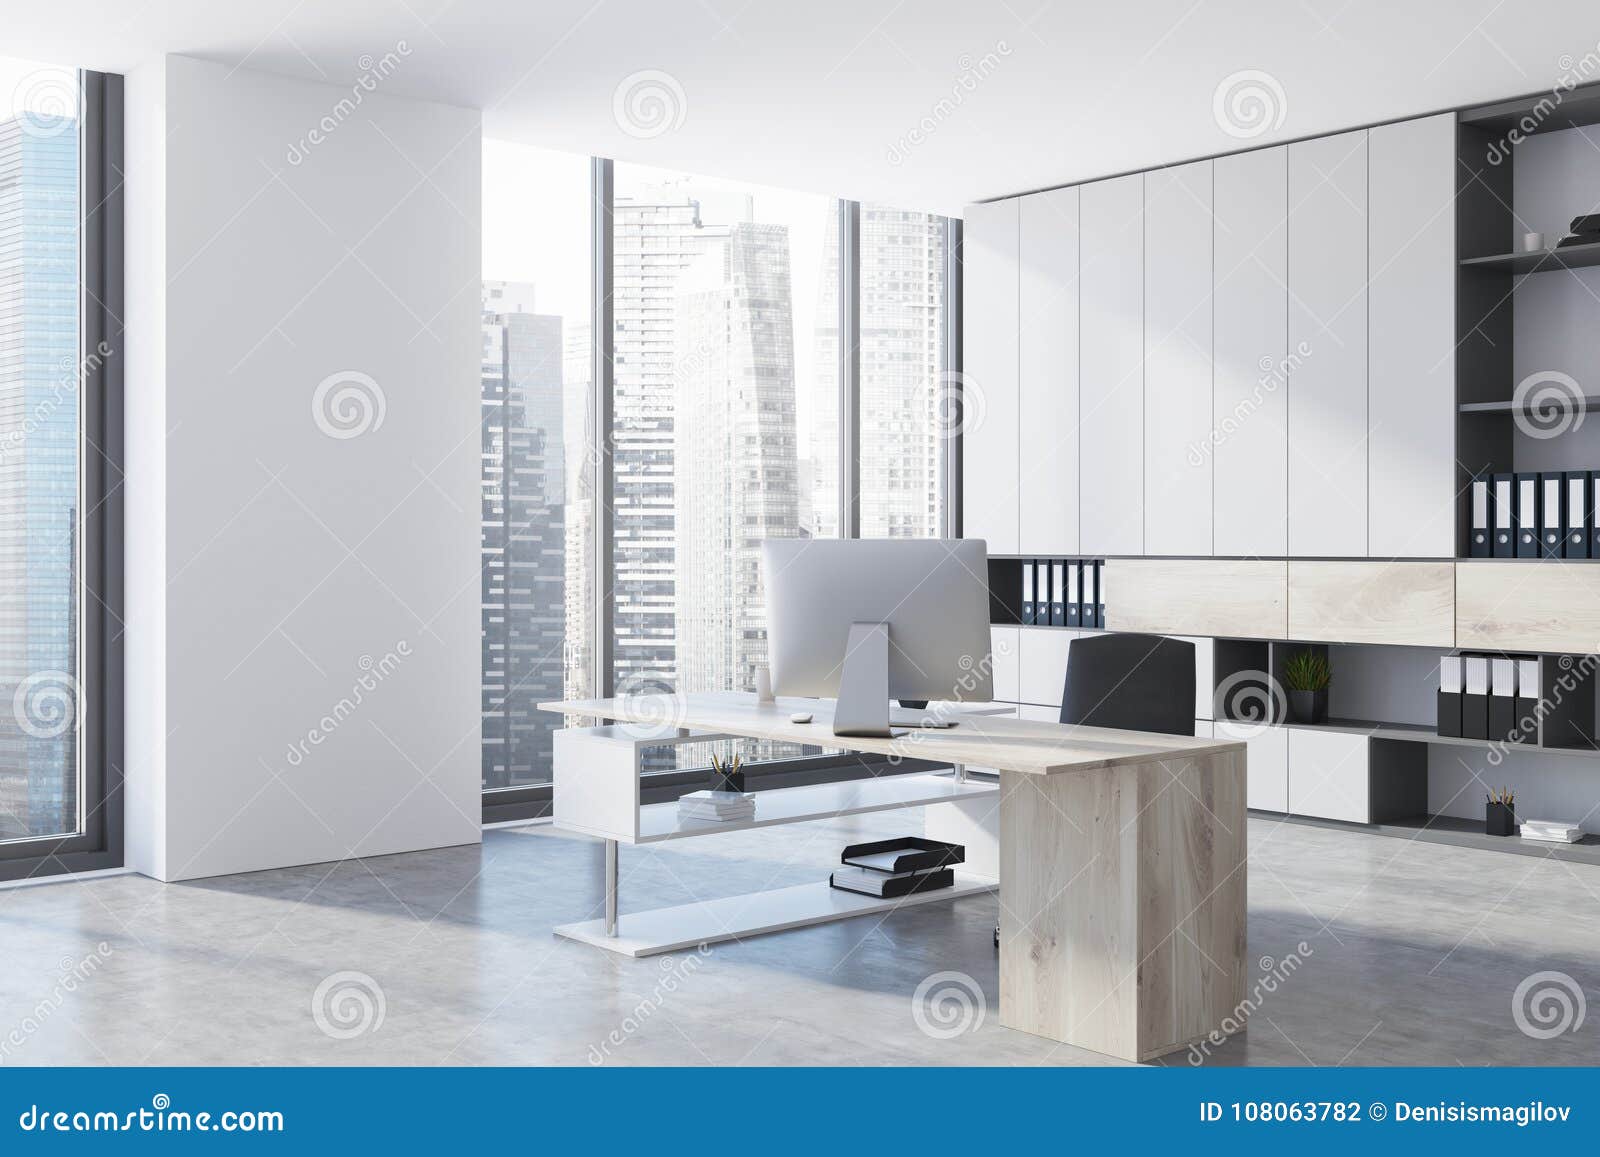 Ceo Office With A Bookcase Window Stock Illustration